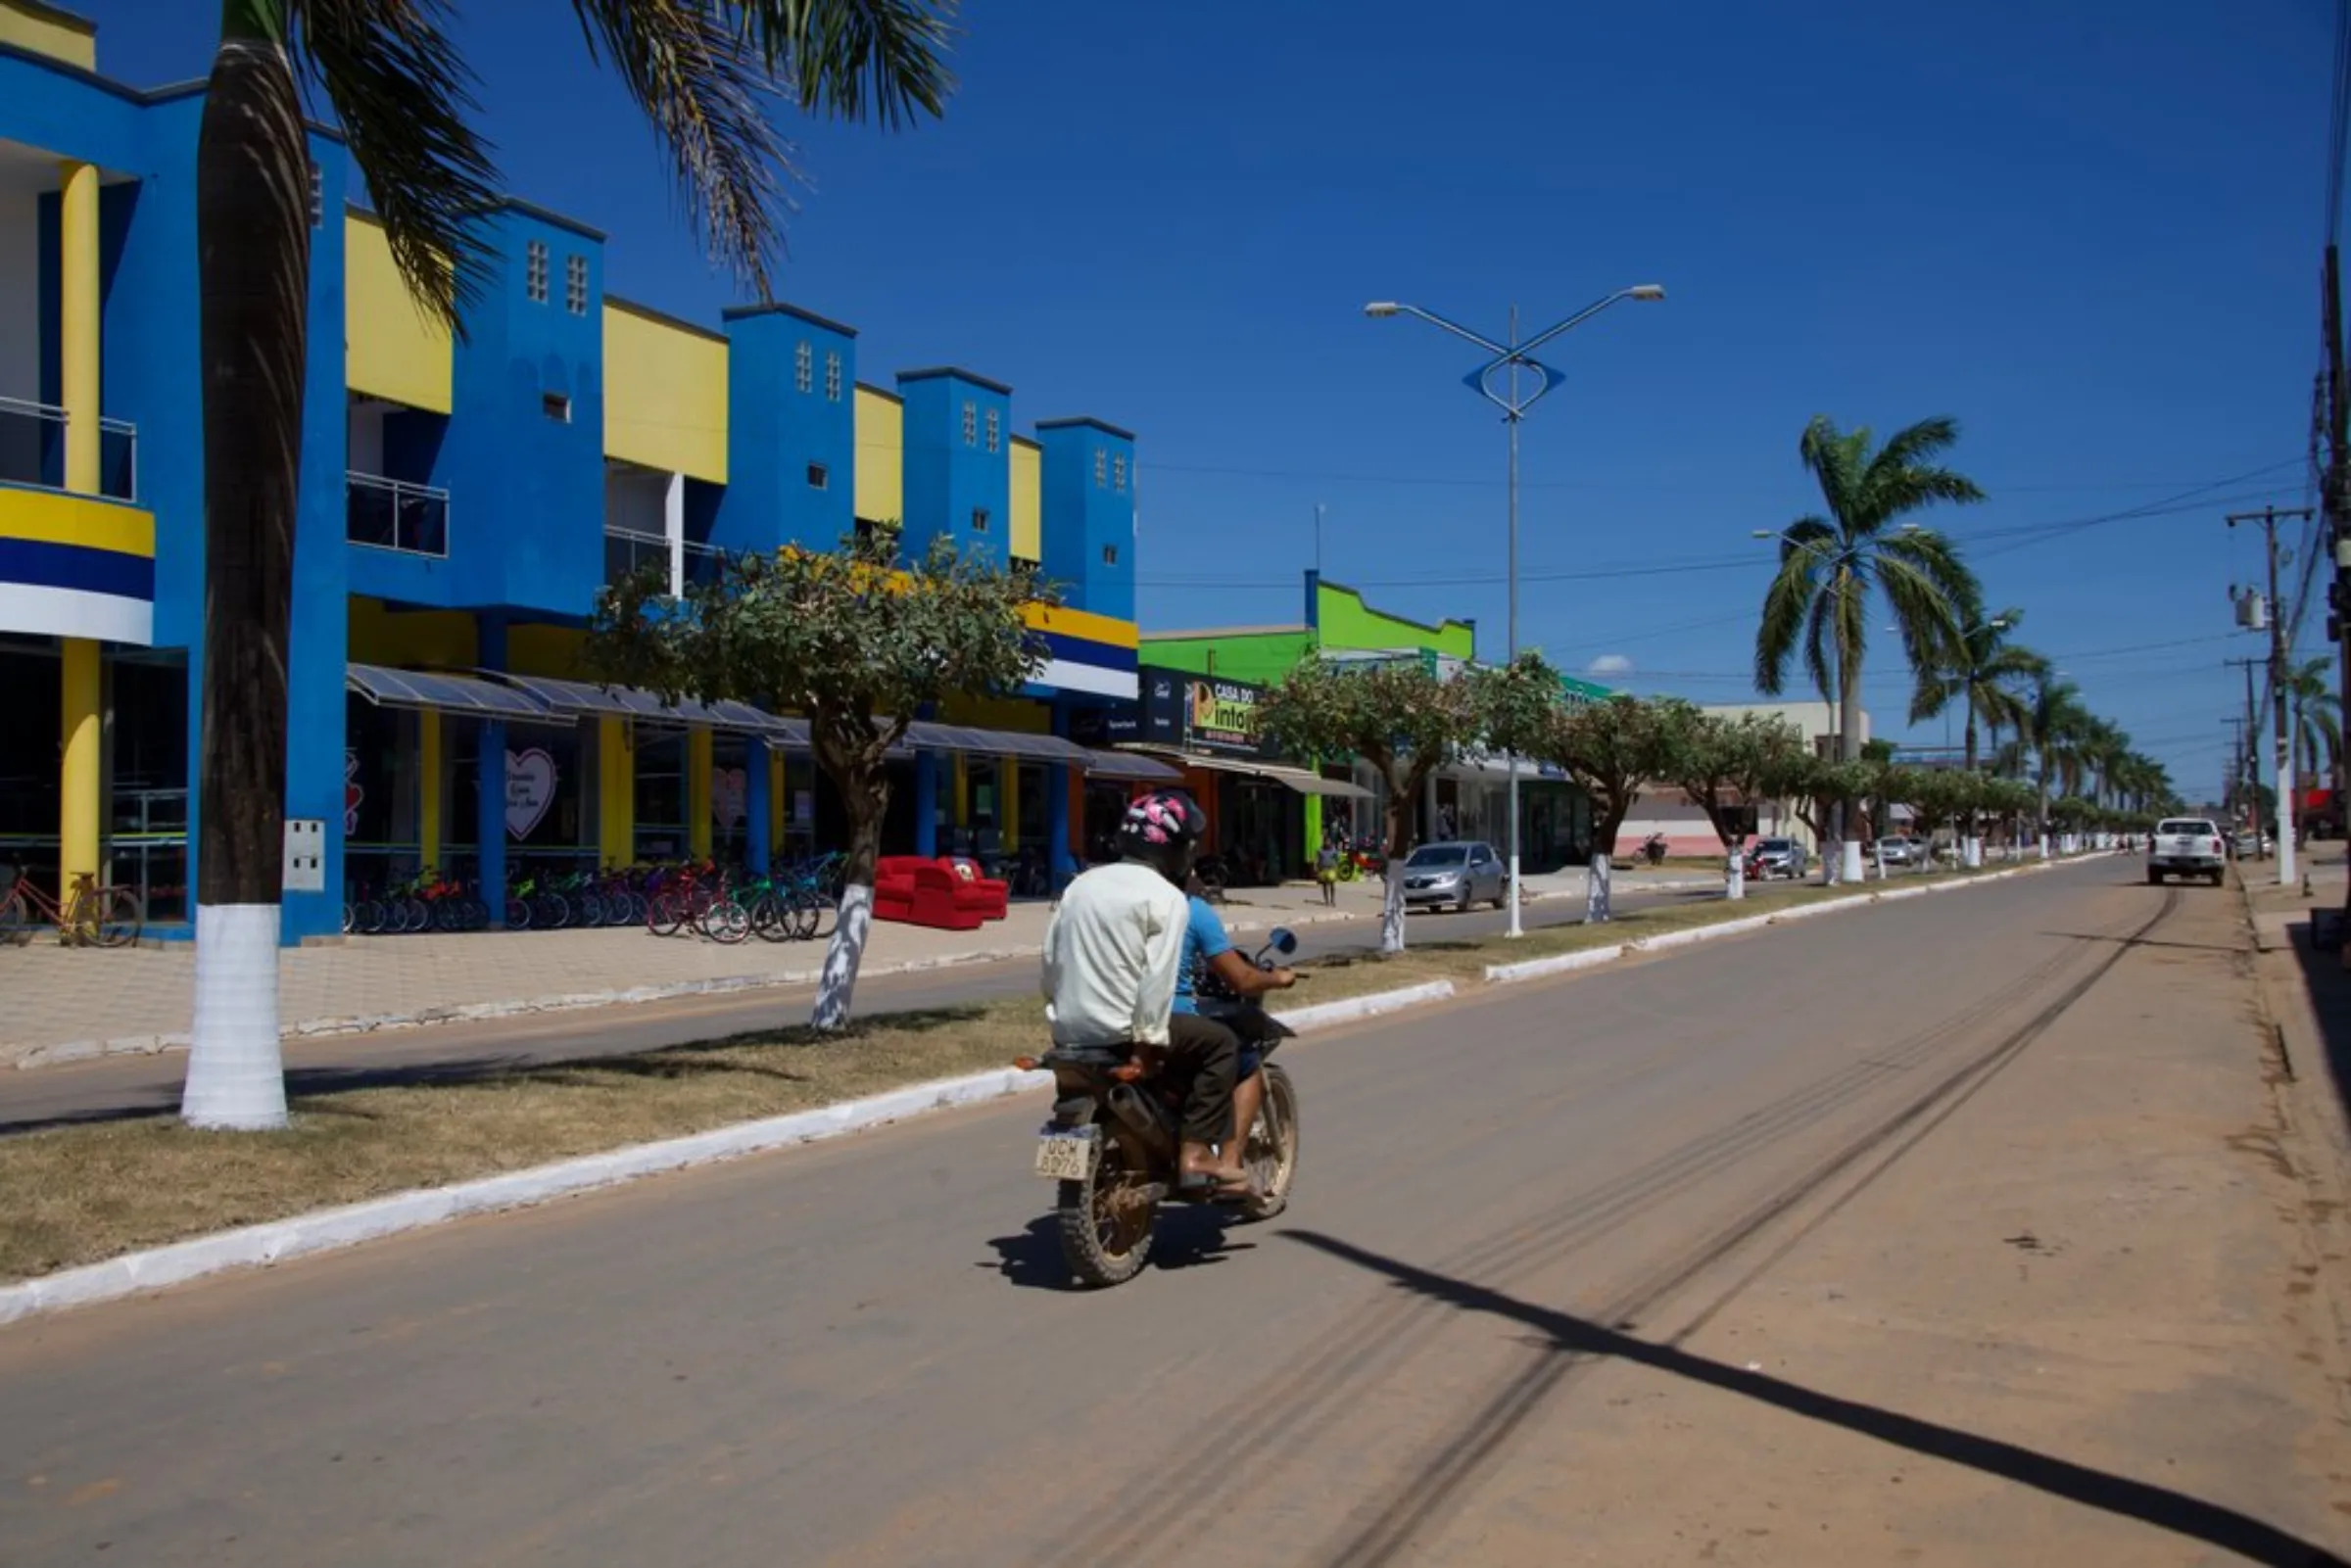 A motorcycle drives down the main street in Colniza, in the state of Mato Grosso, Brazil, May 31, 2022